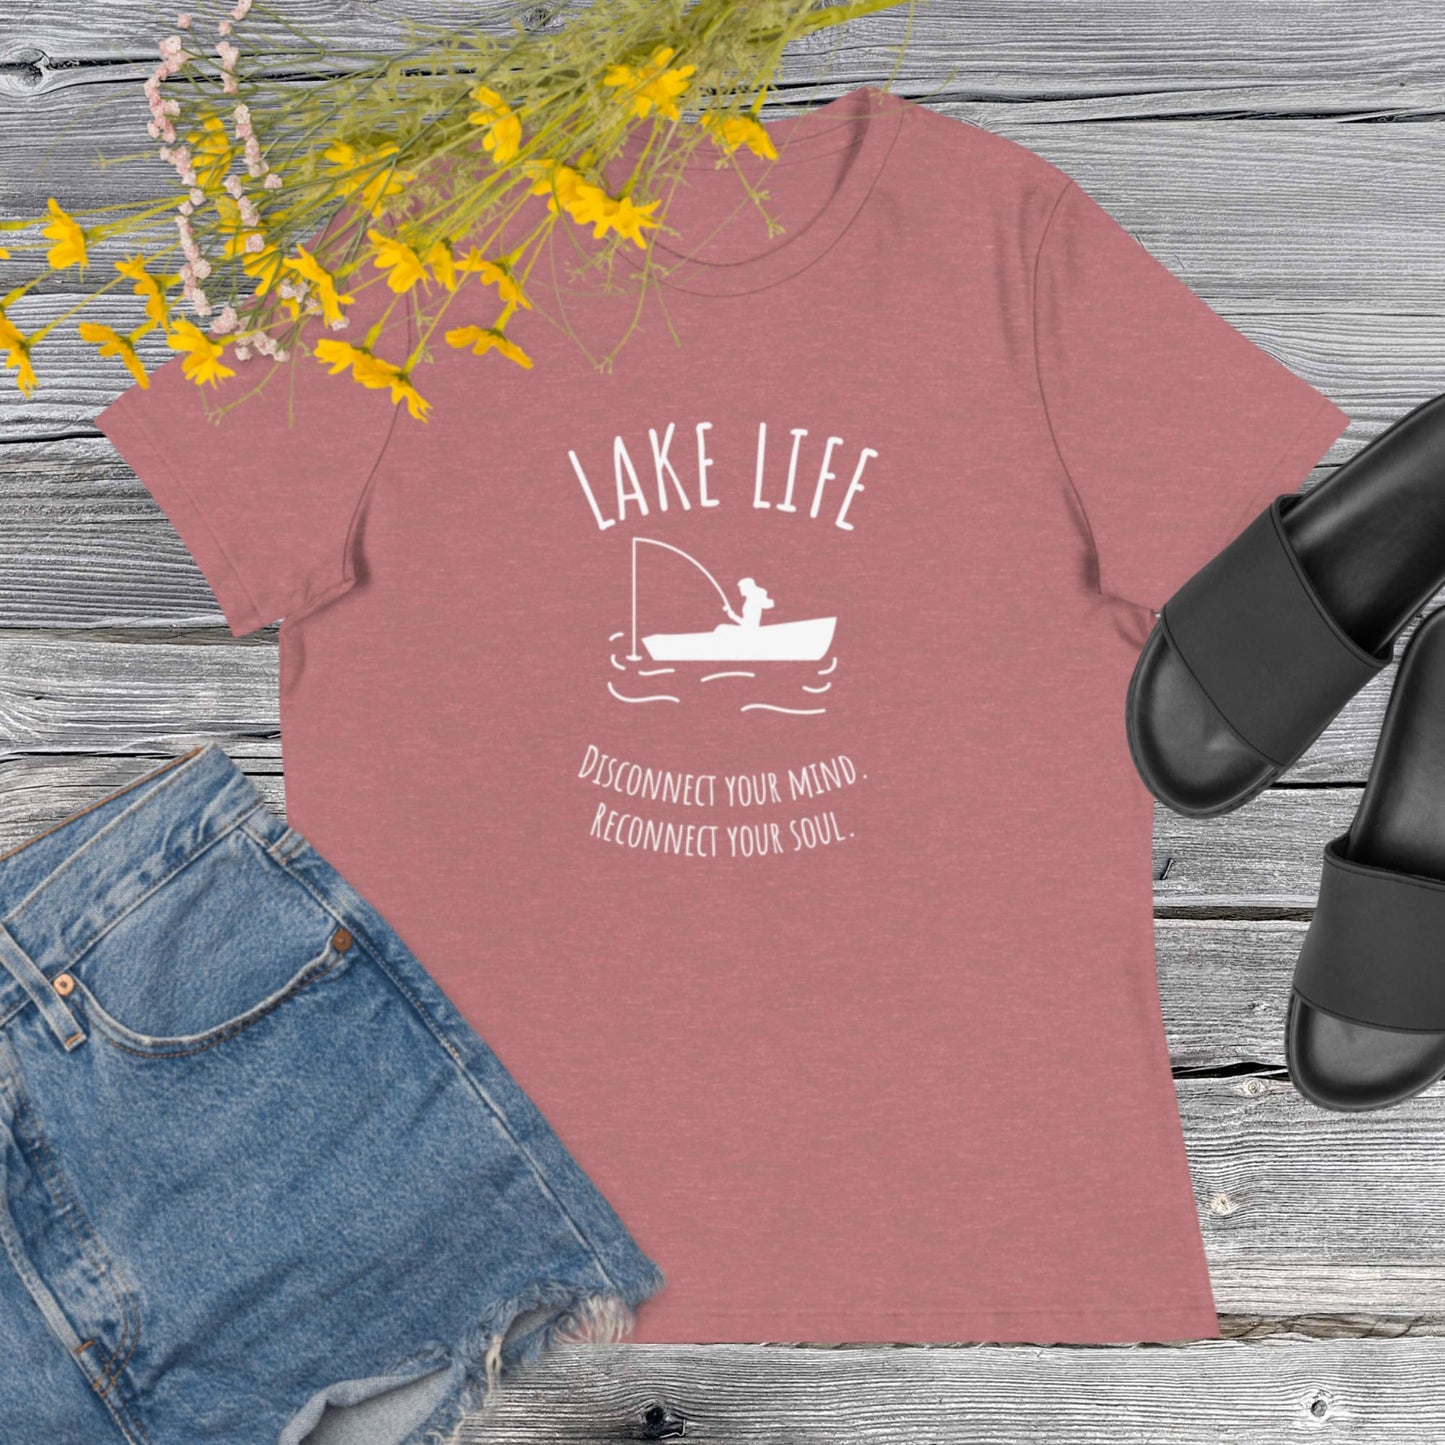 Lake Life - Disconnect your mind, reconnect your soul - Womens tee (white design)